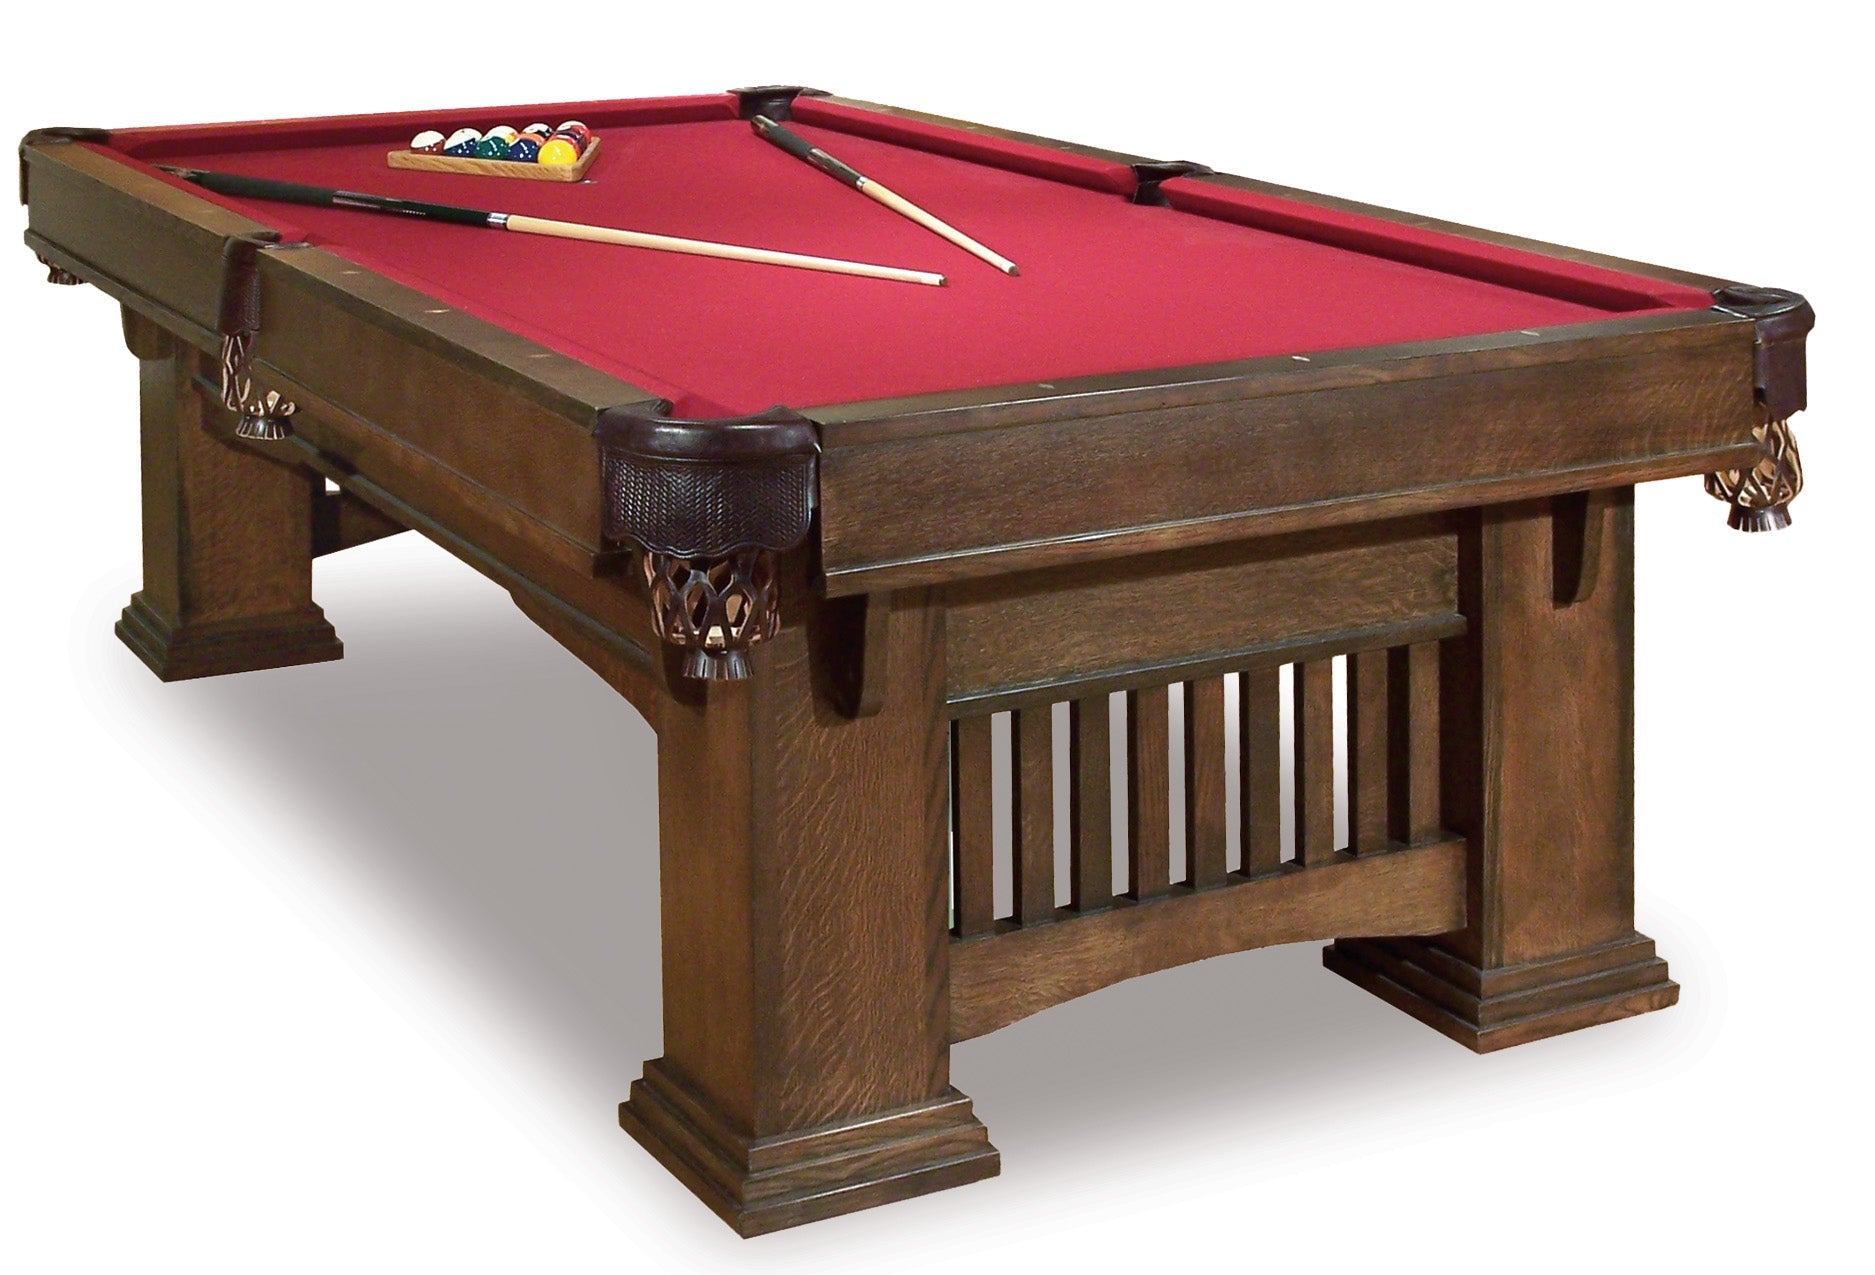 7' Hand-crafted Classic Mission Pool Table (Brown Maple)